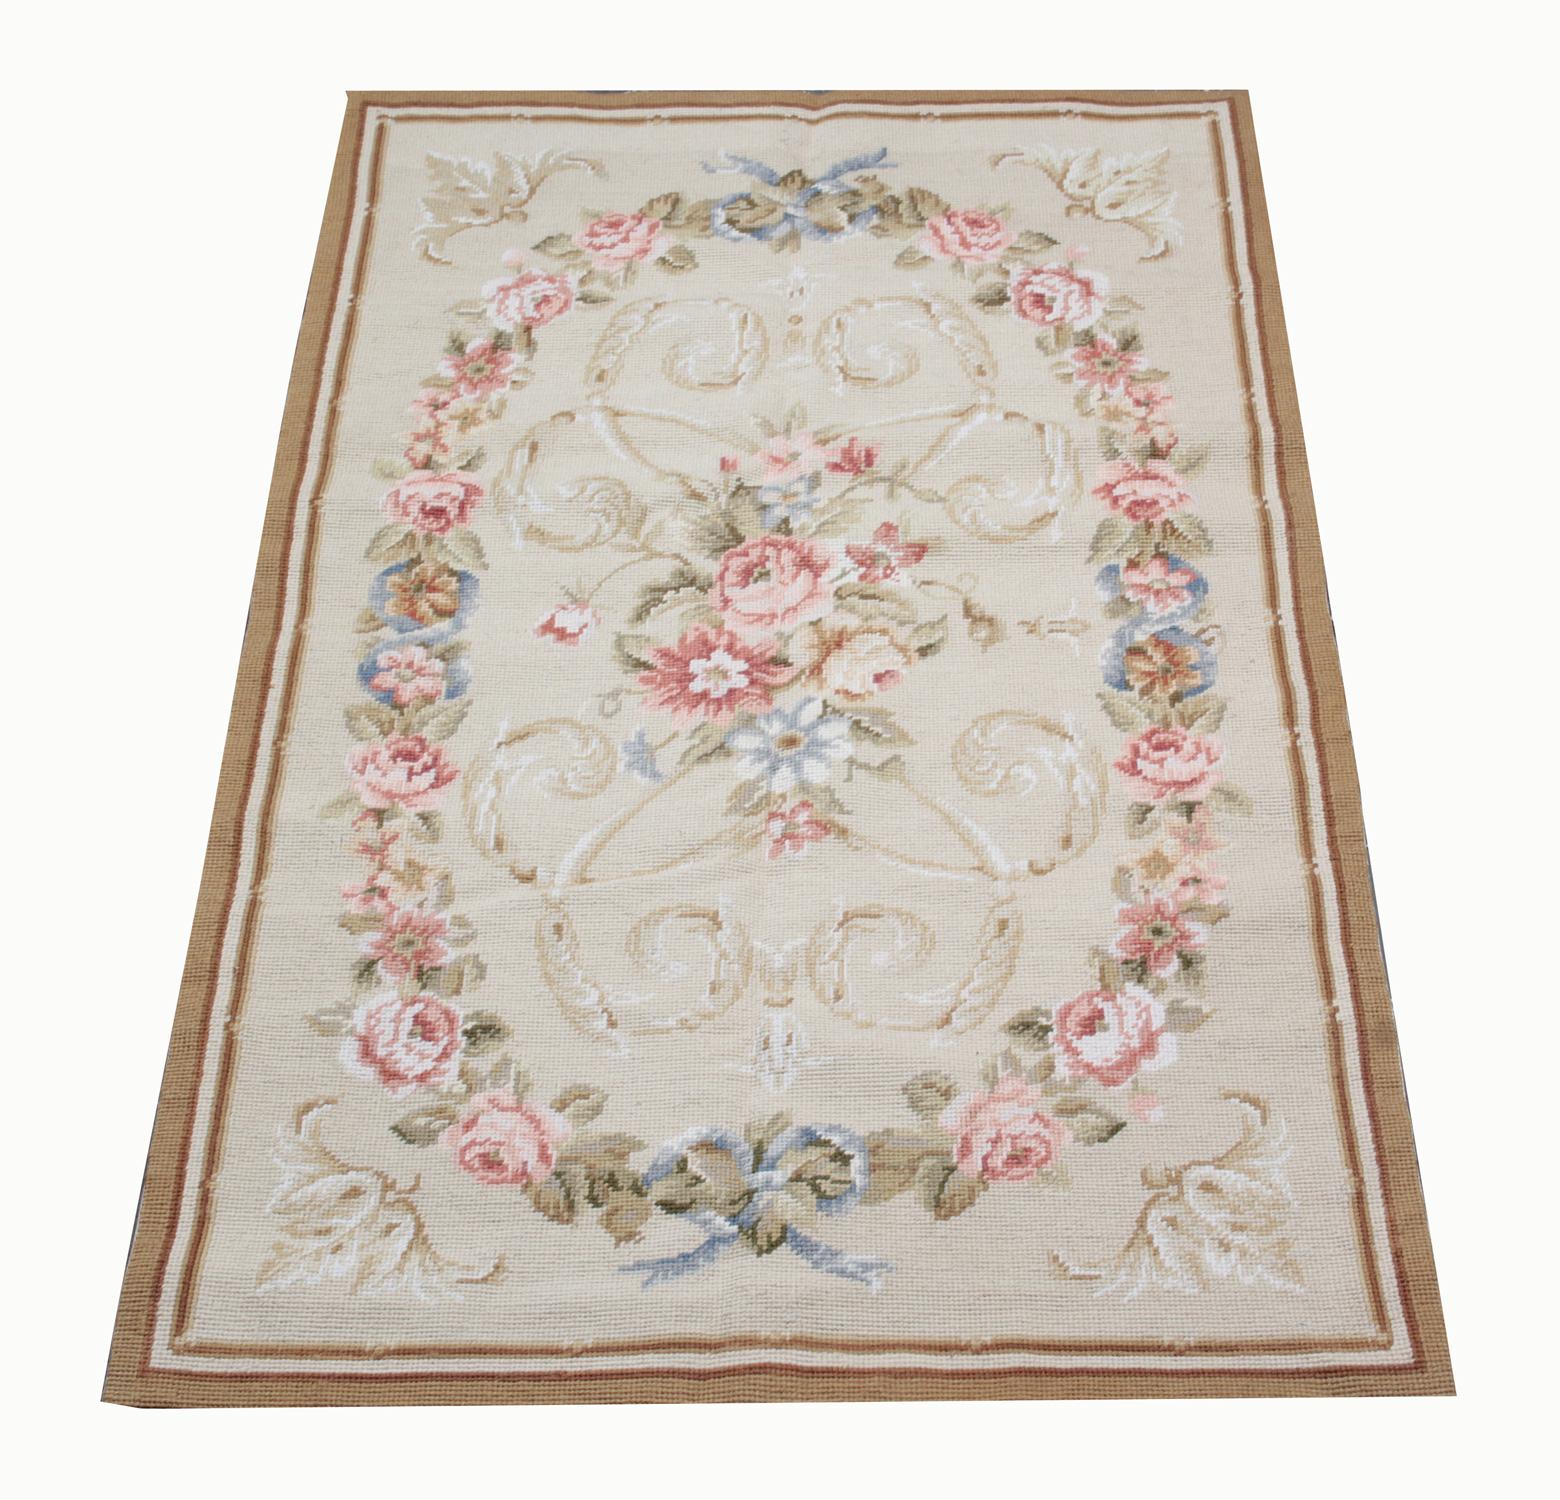 This beige cream rug is the very good item as living room rugs and getting most of the attention in rug store by clients because of the color and design. These handmade elegant Chinese Aubusson floor rugs have soft shades of colors. These luxury